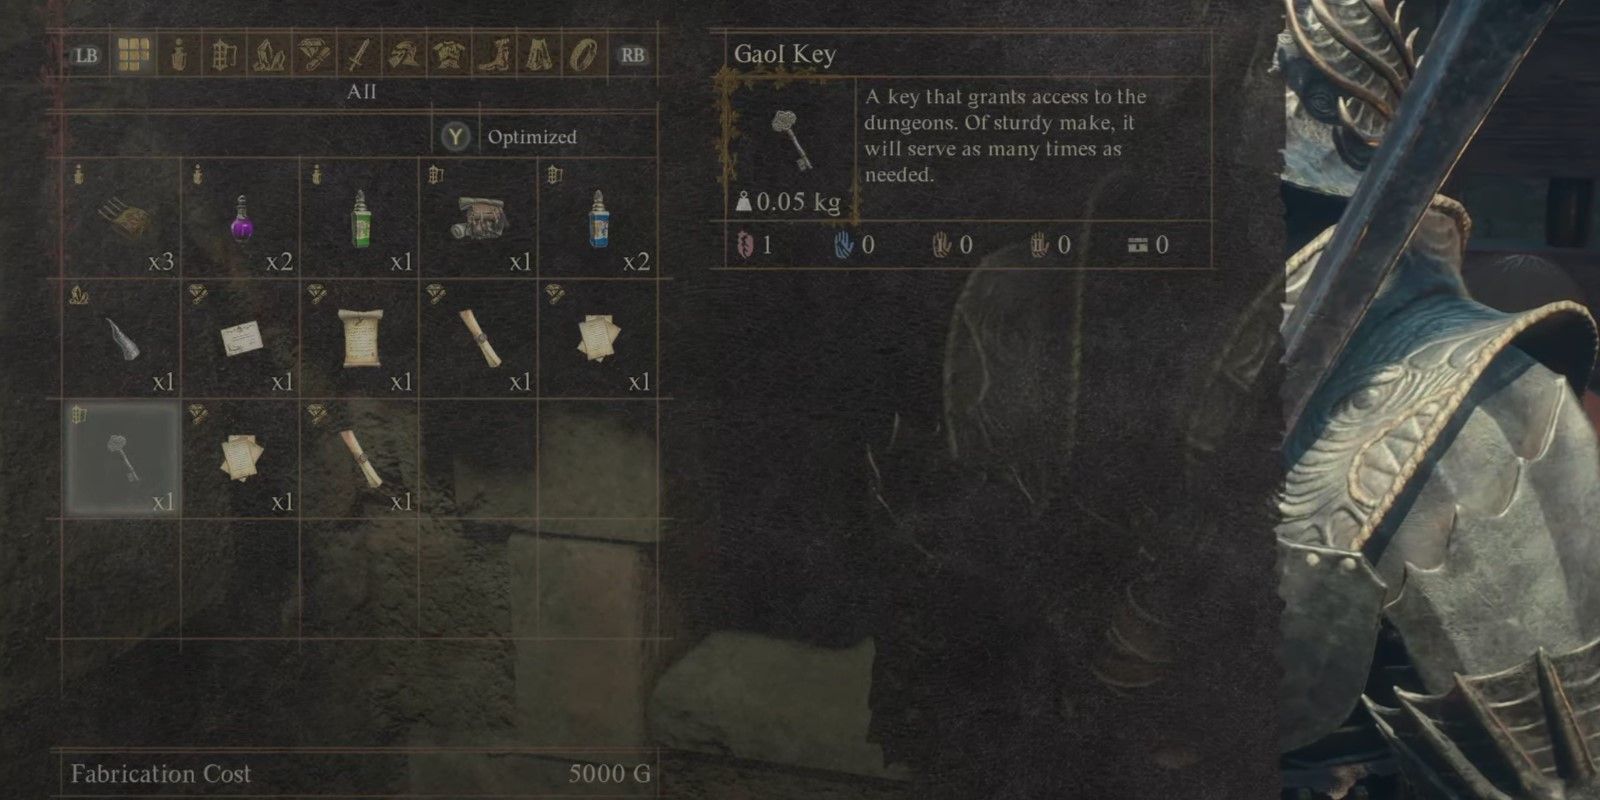 The Dragon's Dogma 2 character is duplicating the Gaol Key.